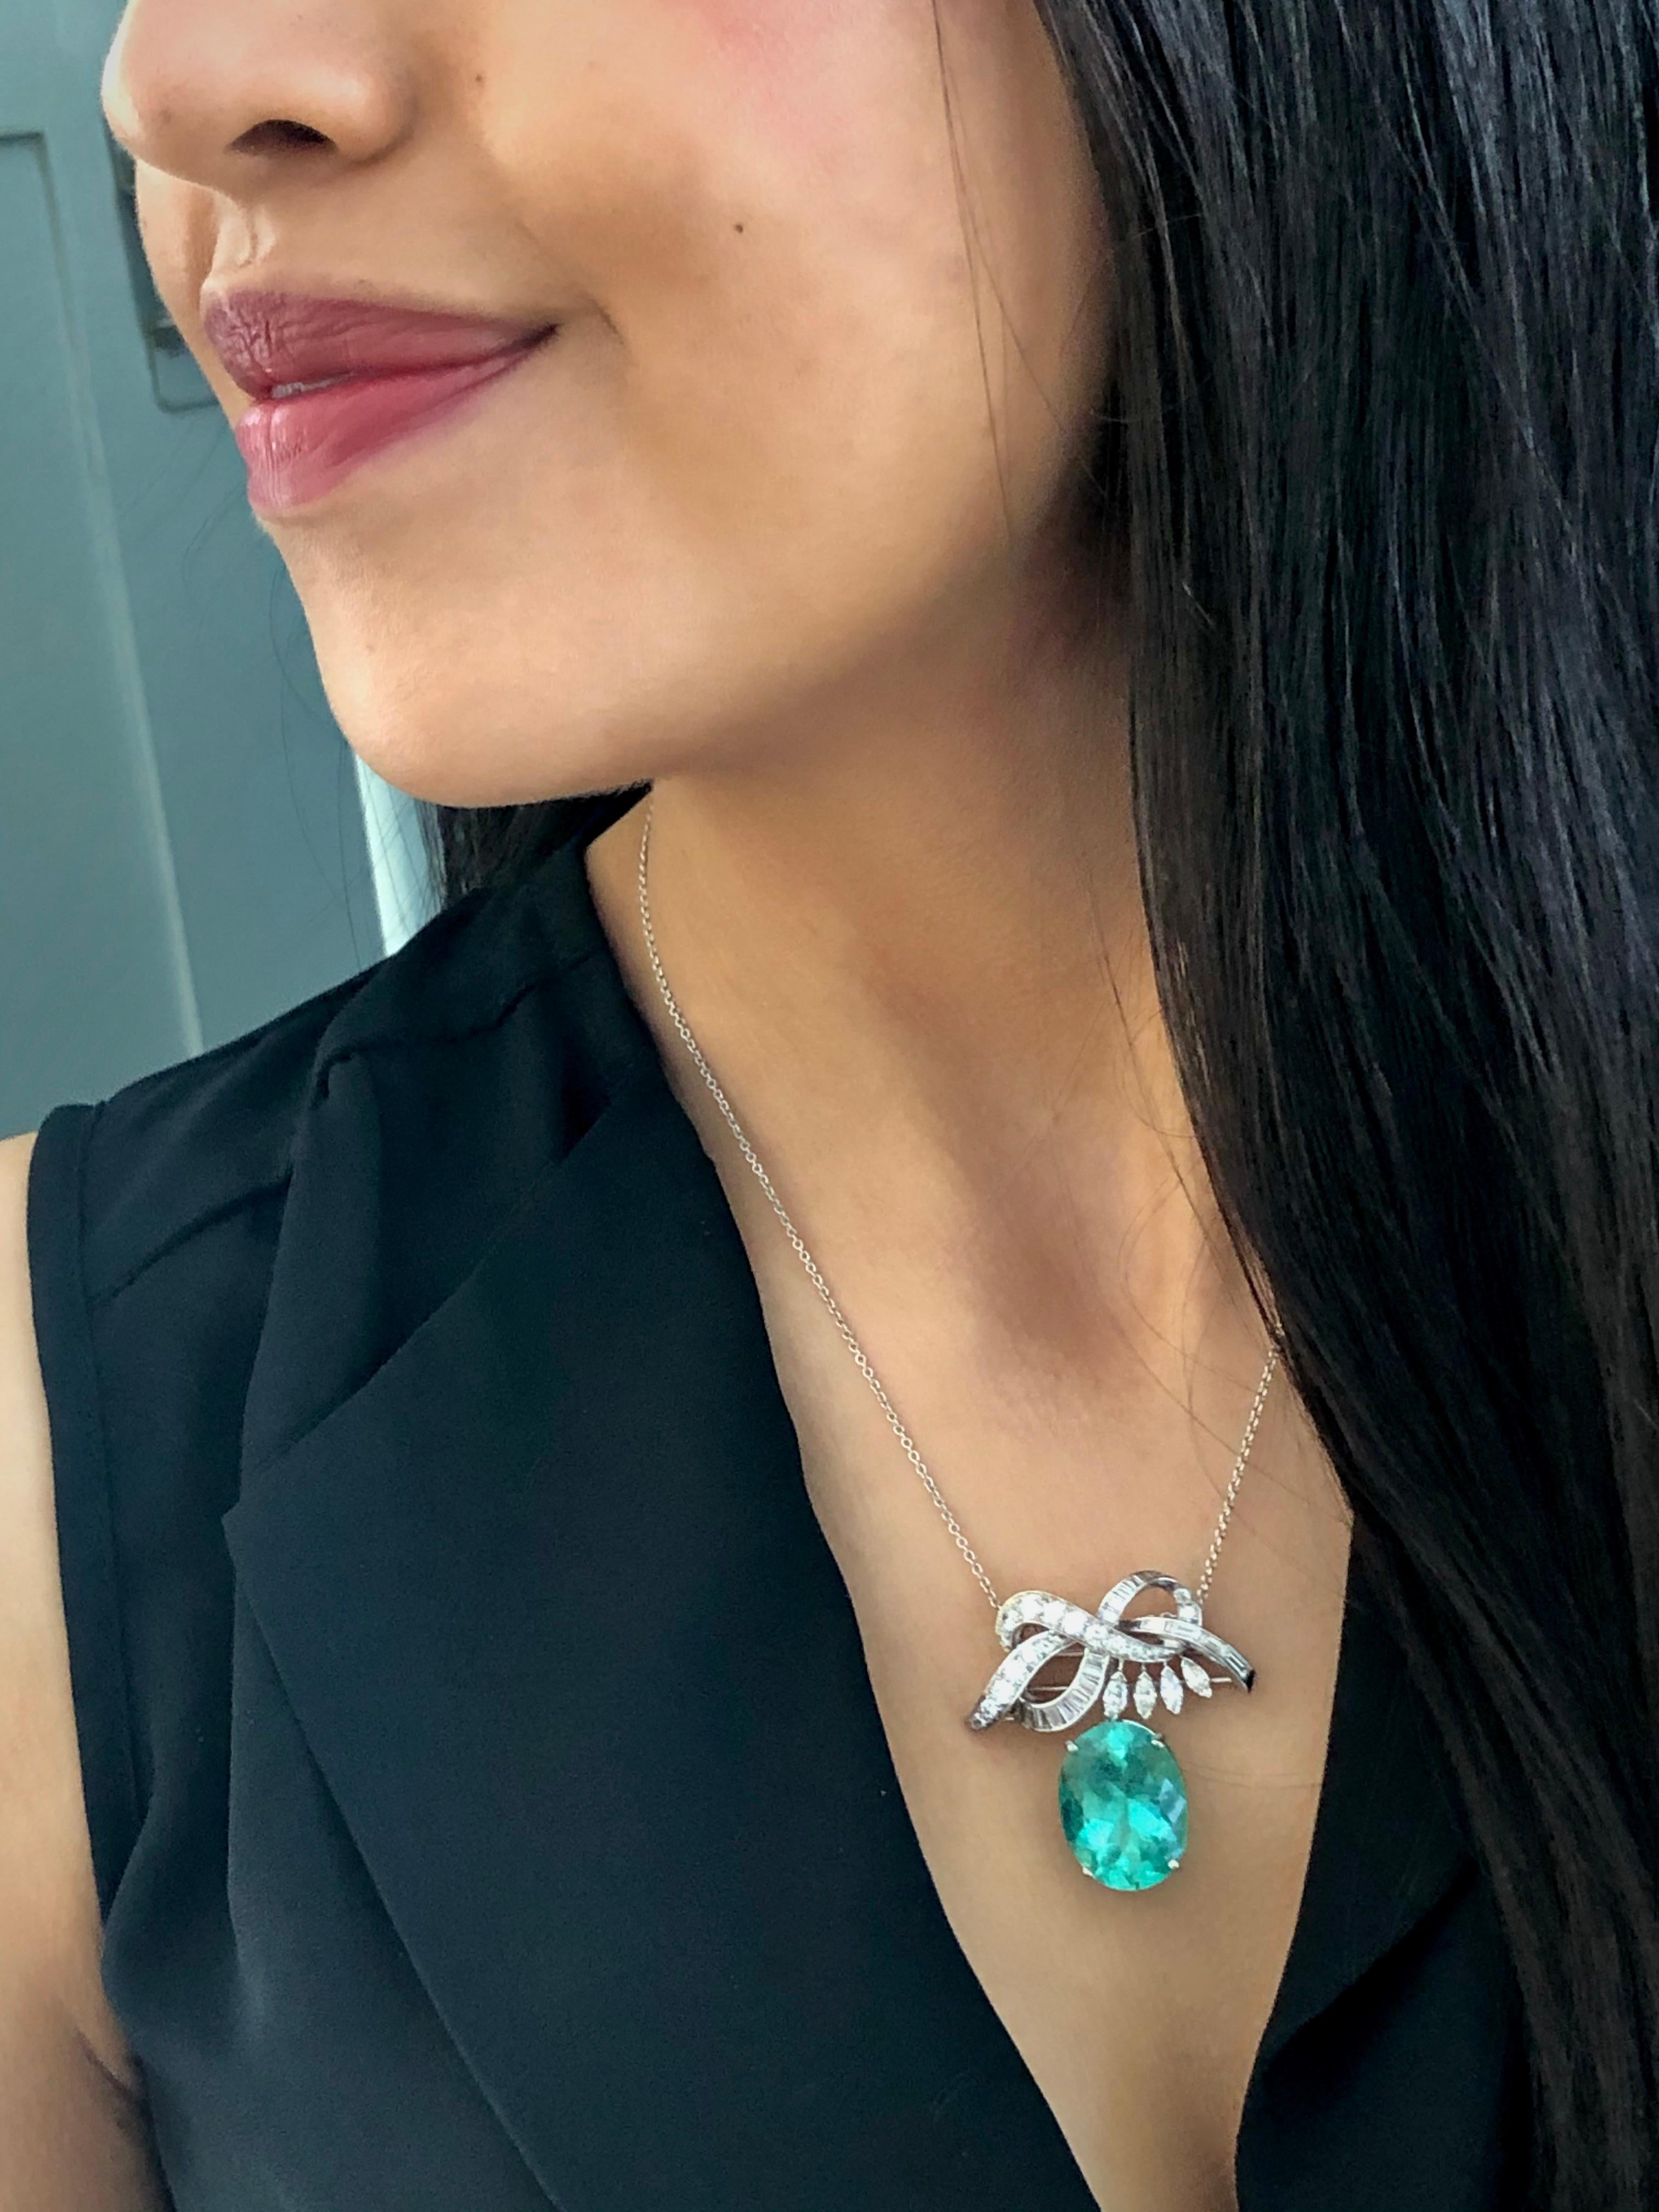 An exquisite statement Brooch/Pendant necklace featuring an oval cut natural Colombian emerald weighing 16.16 carats set in a ribbon motif brooch. The ribbon is set with tapered baguette, step-cut diamonds, marquise-cut diamonds, and graduated